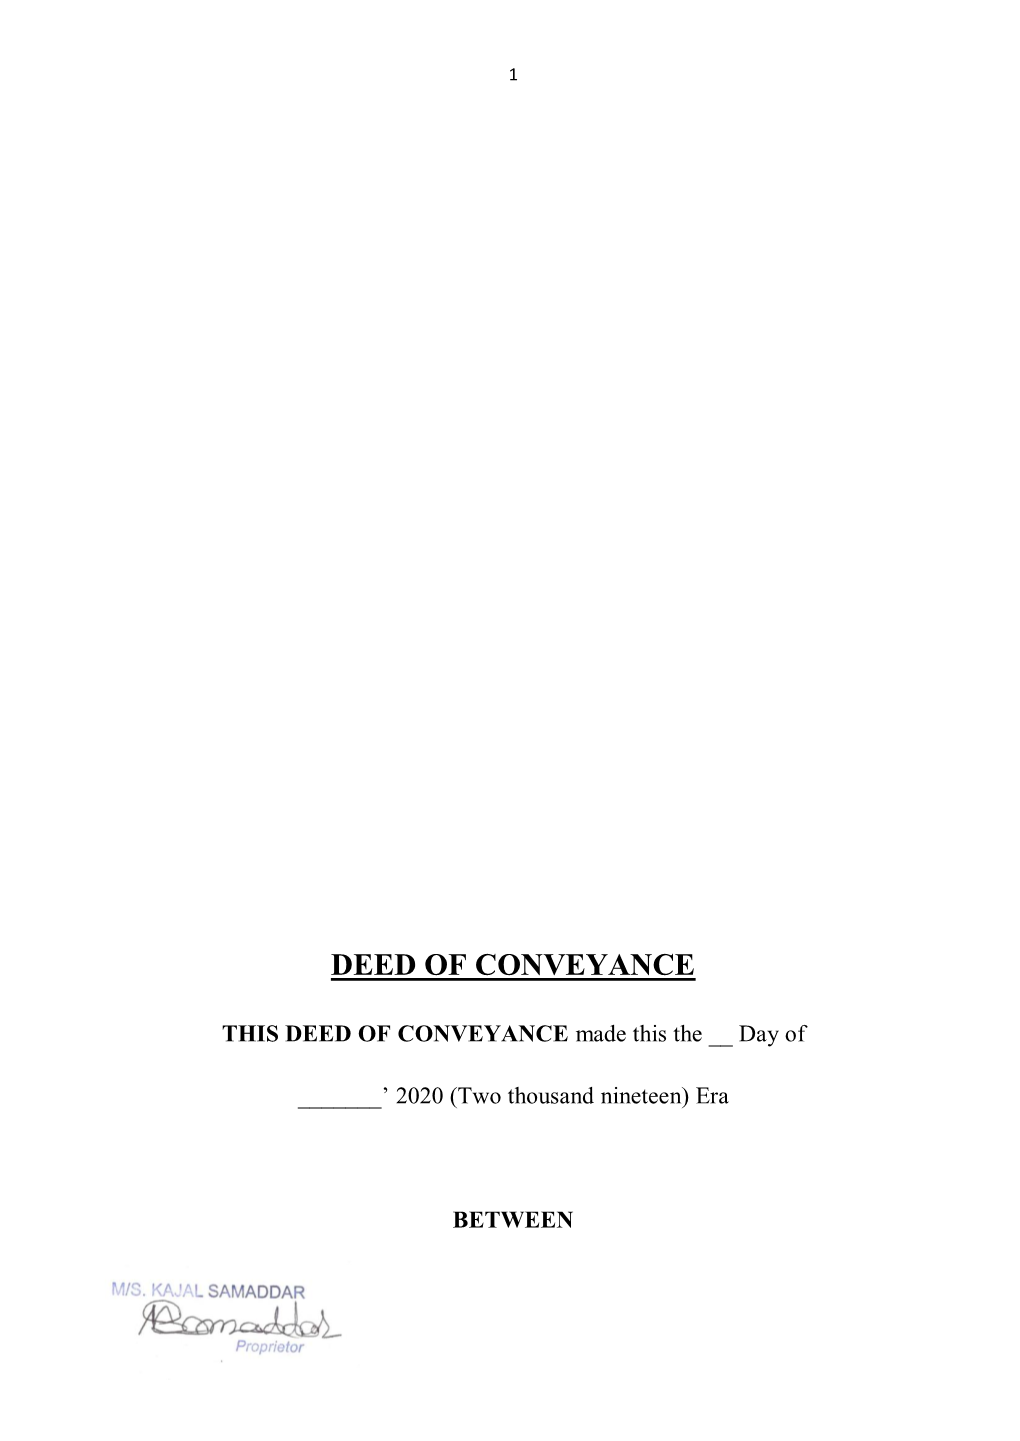 Deed of Conveyance